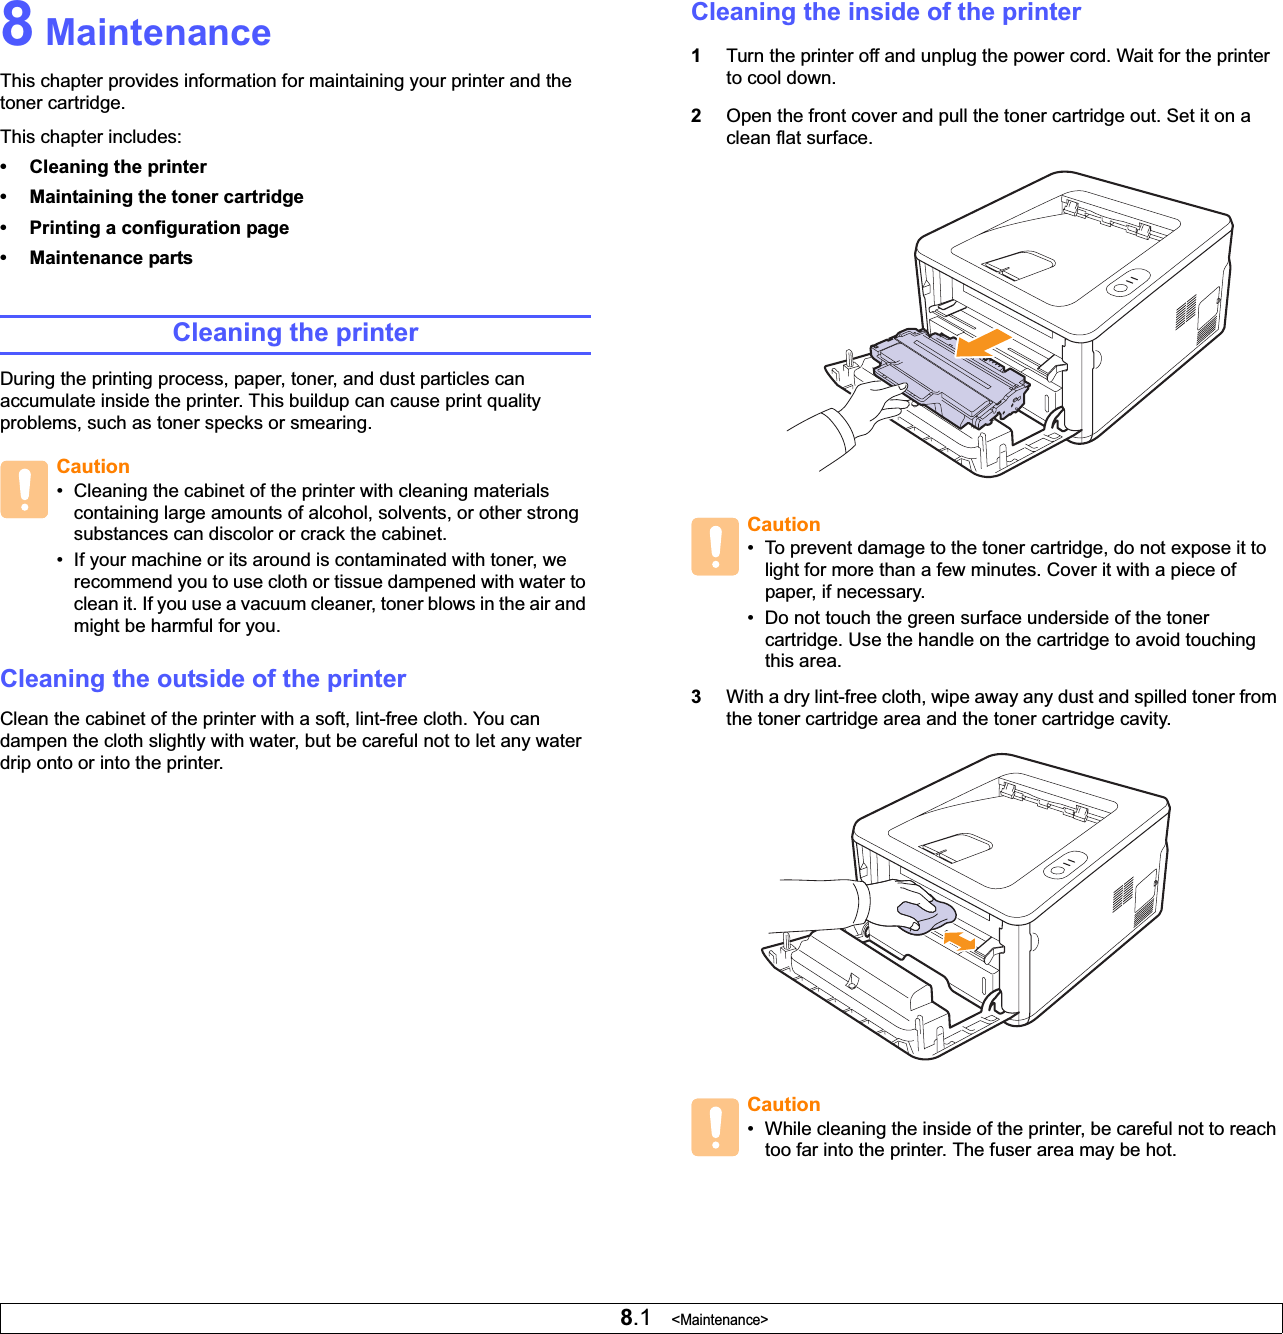 8.1   &lt;Maintenance&gt;8 MaintenanceThis chapter provides information for maintaining your printer and the toner cartridge.This chapter includes:• Cleaning the printer• Maintaining the toner cartridge• Printing a configuration page• Maintenance partsCleaning the printerDuring the printing process, paper, toner, and dust particles can accumulate inside the printer. This buildup can cause print quality problems, such as toner specks or smearing. Cleaning the outside of the printerClean the cabinet of the printer with a soft, lint-free cloth. You can dampen the cloth slightly with water, but be careful not to let any water drip onto or into the printer.Caution• Cleaning the cabinet of the printer with cleaning materials containing large amounts of alcohol, solvents, or other strong substances can discolor or crack the cabinet.• If your machine or its around is contaminated with toner, we recommend you to use cloth or tissue dampened with water to clean it. If you use a vacuum cleaner, toner blows in the air and might be harmful for you. Cleaning the inside of the printer1Turn the printer off and unplug the power cord. Wait for the printer to cool down.2Open the front cover and pull the toner cartridge out. Set it on a clean flat surface.3With a dry lint-free cloth, wipe away any dust and spilled toner from the toner cartridge area and the toner cartridge cavity.Caution• To prevent damage to the toner cartridge, do not expose it to light for more than a few minutes. Cover it with a piece of paper, if necessary. • Do not touch the green surface underside of the toner cartridge. Use the handle on the cartridge to avoid touching this area.Caution• While cleaning the inside of the printer, be careful not to reach too far into the printer. The fuser area may be hot.